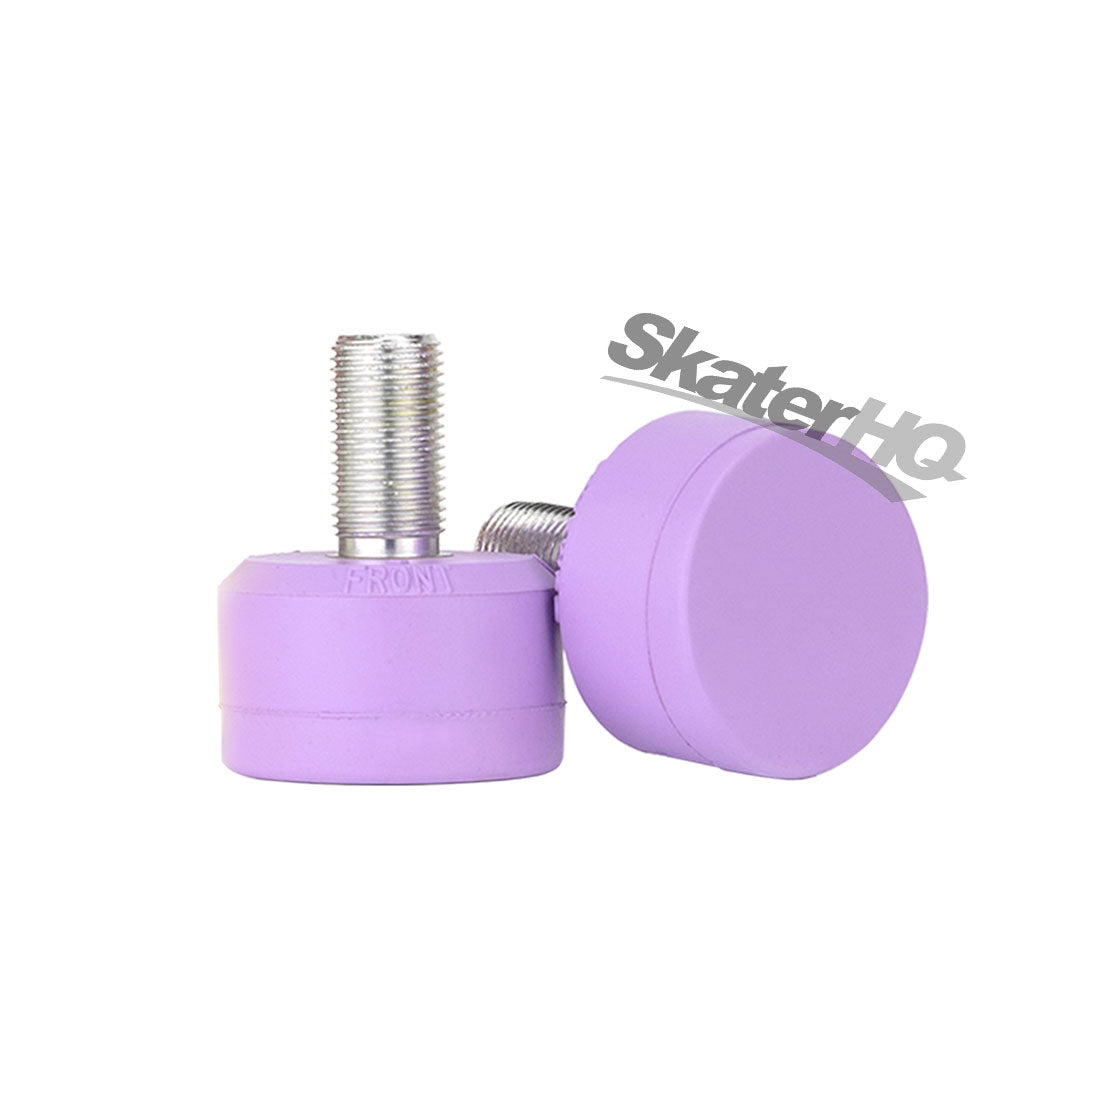 Gumball Toe Stops - Long/Standard - Grape 83A Roller Skate Hardware and Parts